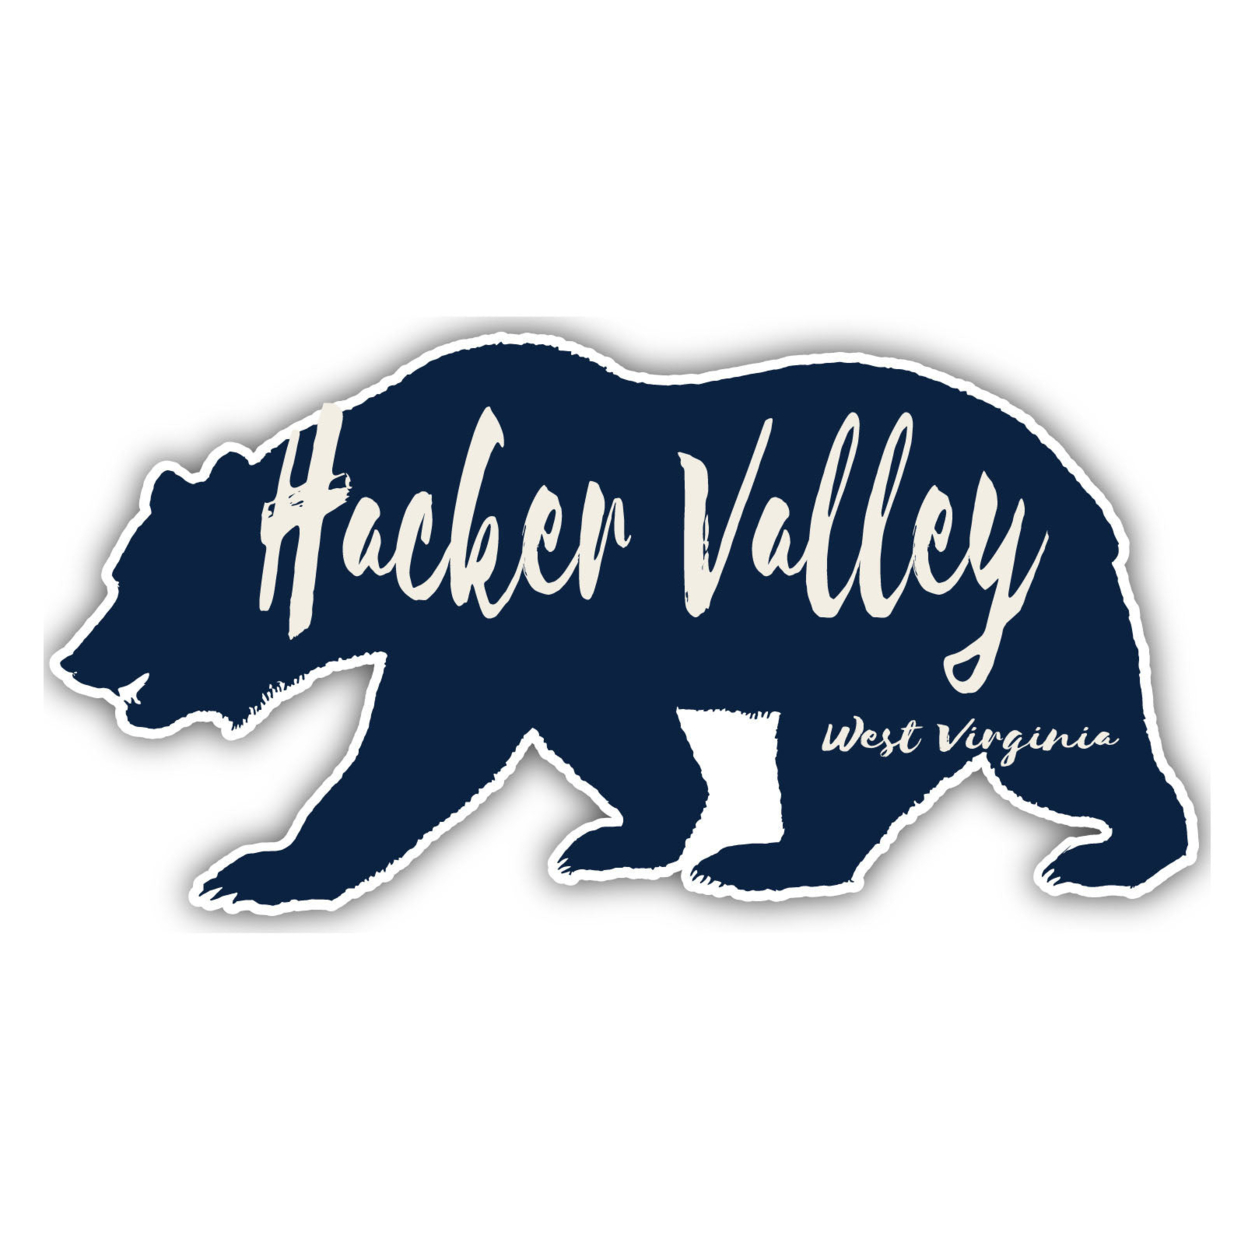 Hacker Valley West Virginia Souvenir Decorative Stickers (Choose Theme And Size) - Single Unit, 8-Inch, Great Outdoors